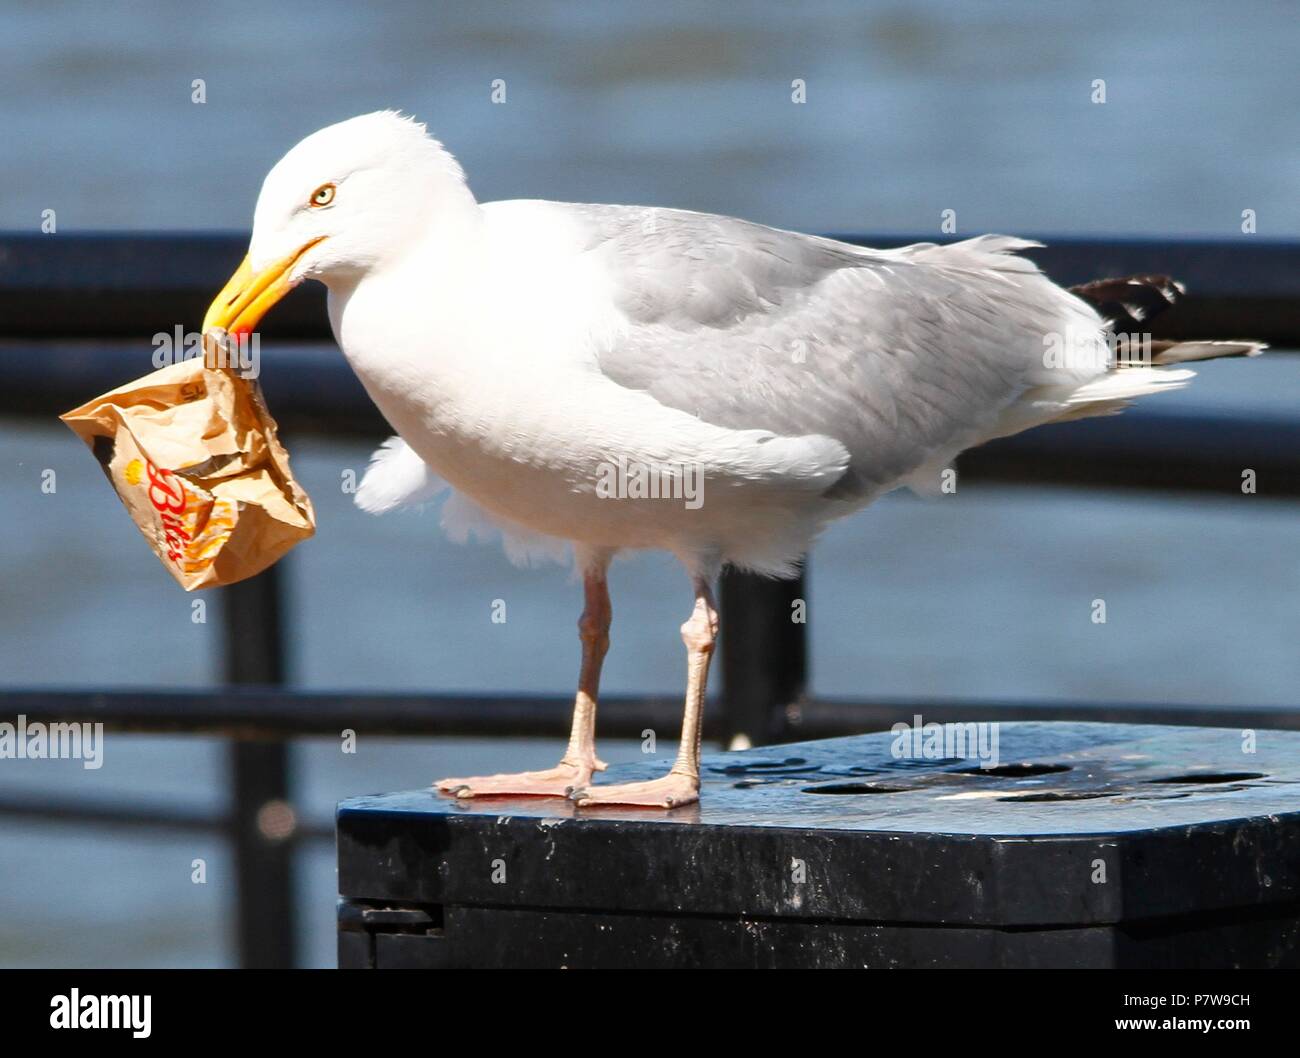 wirral-uk-8-july-2018-a-seagull-scavarges-for-food-during-heatwave-credit-ian-fairbrotheralamy-live-news-P7W9CH.jpg